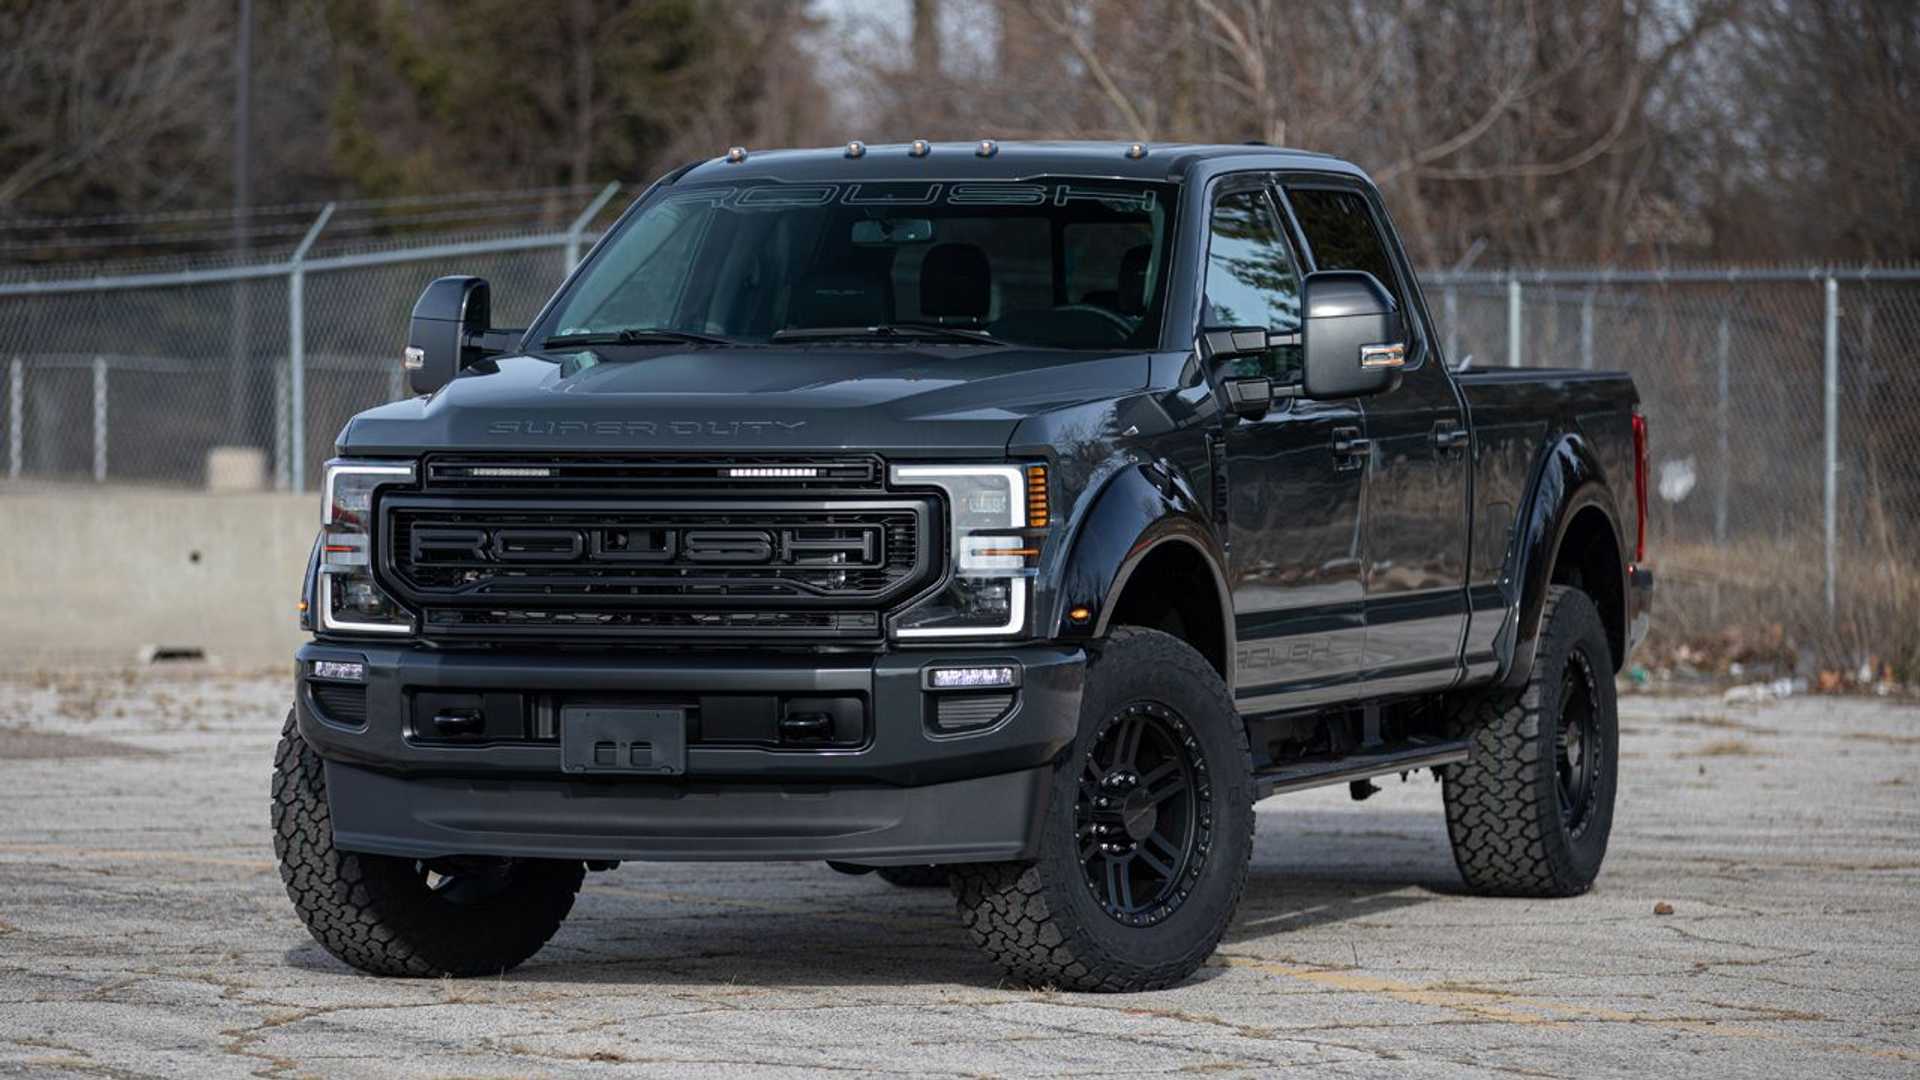 2021 Roush Super Duty Makes Ford's Big Truck Even More Capable